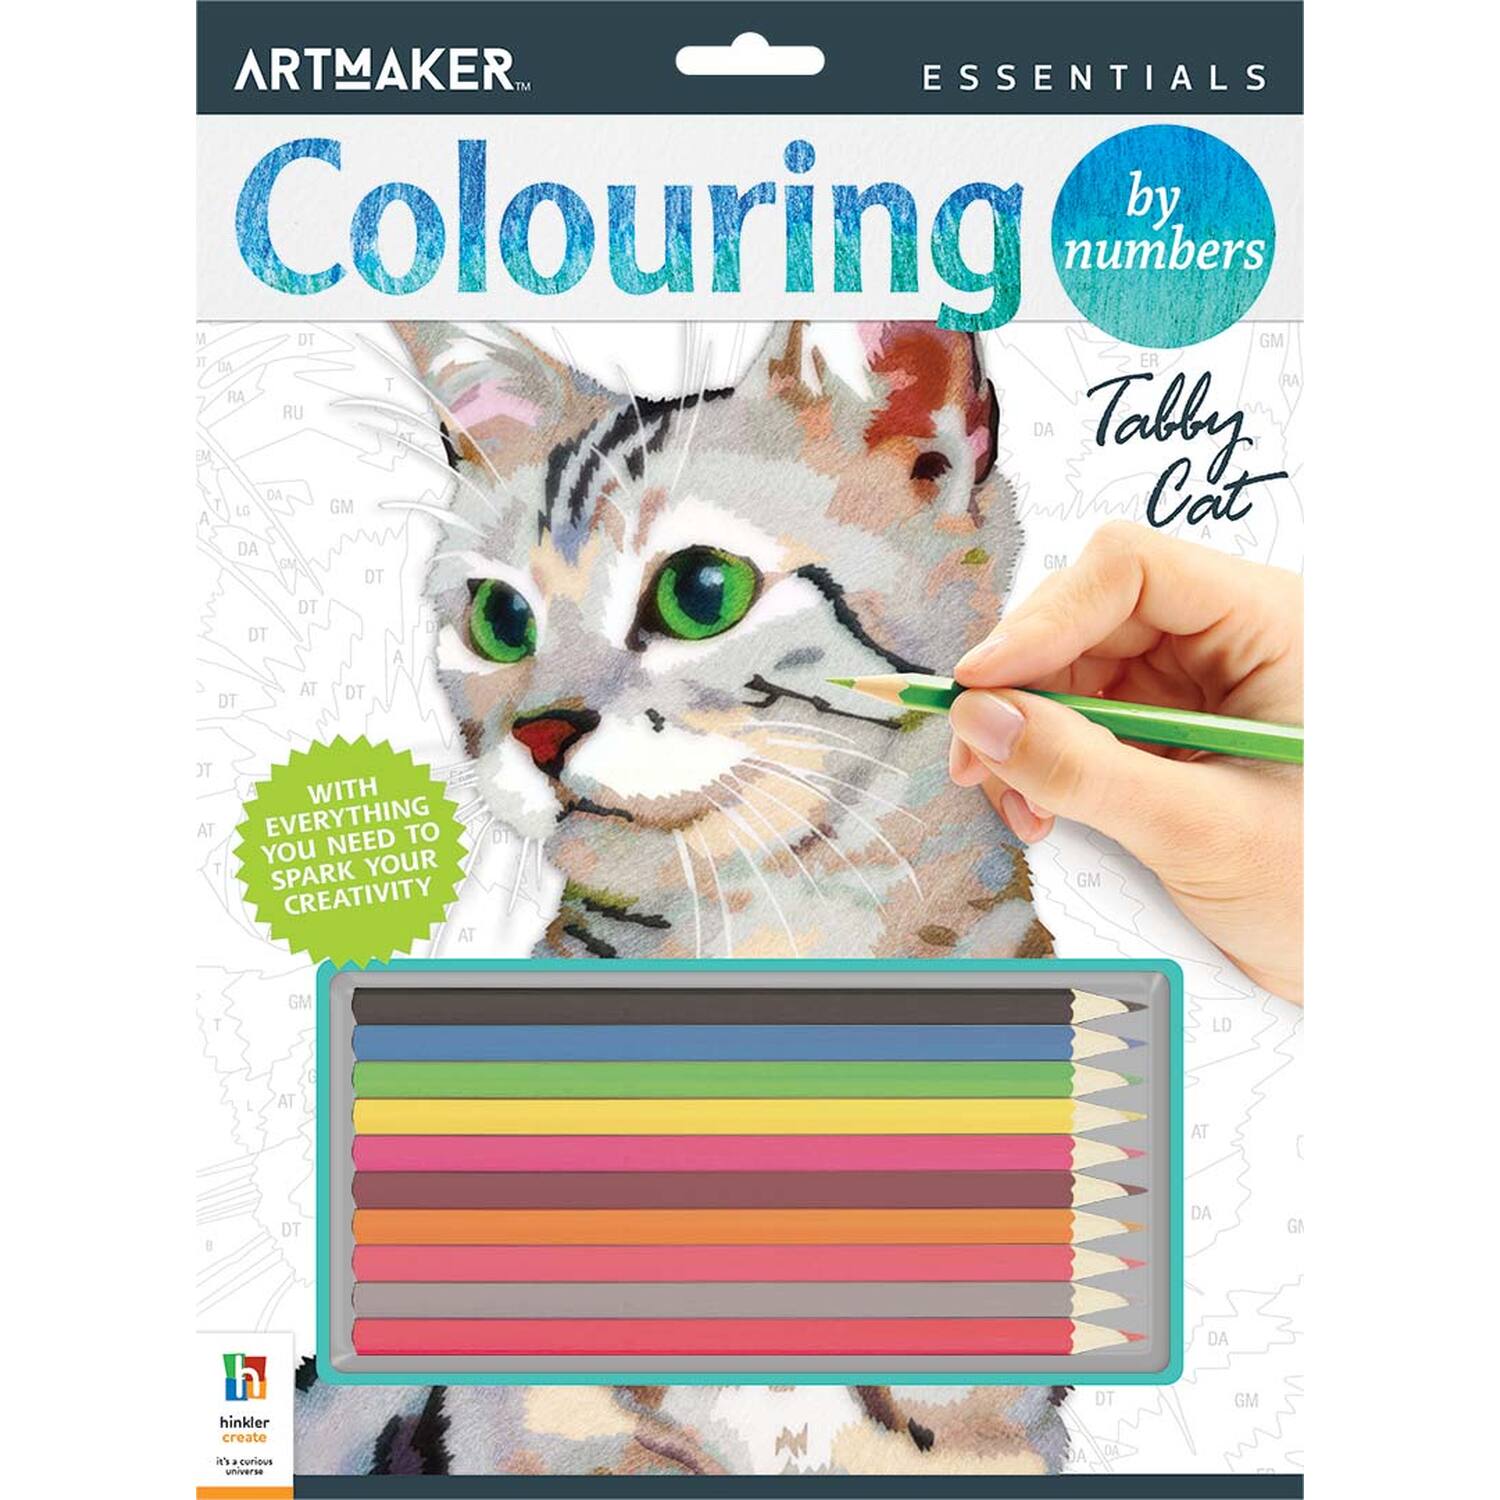 Art Maker Essentials Colouring by Numbers Kit - Tabby Cat Image